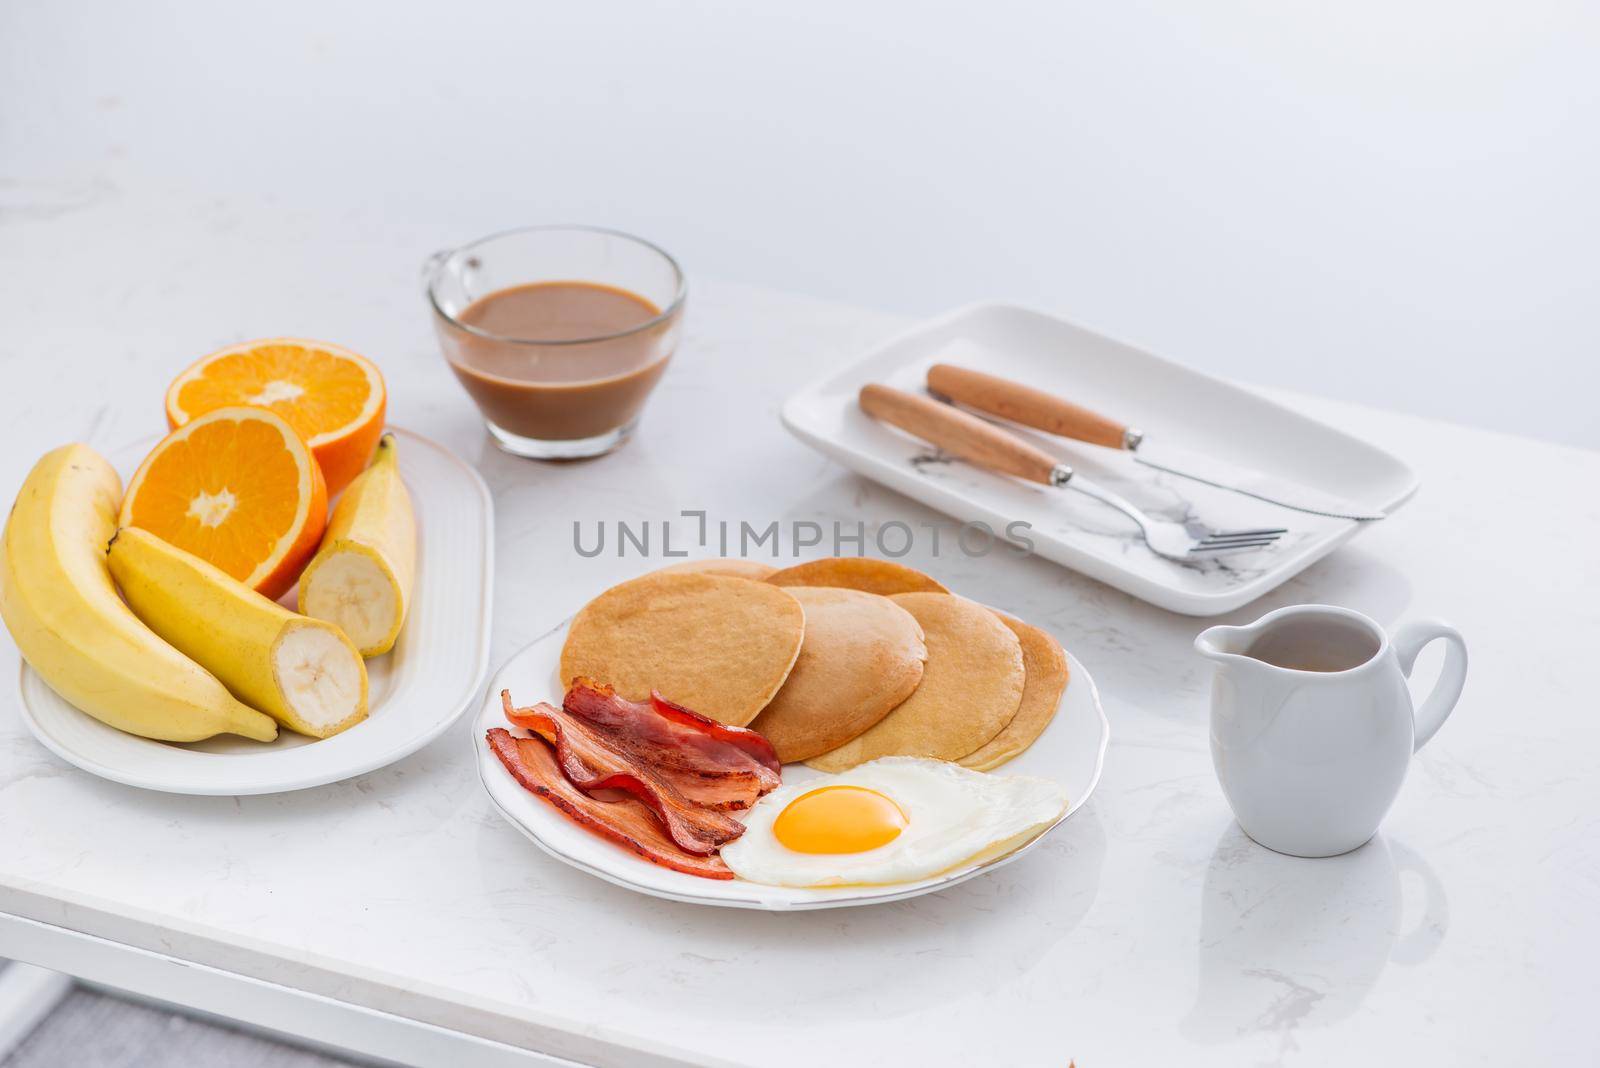 Healthy Full American Breakfast with Eggs Bacon and Pancakes by makidotvn